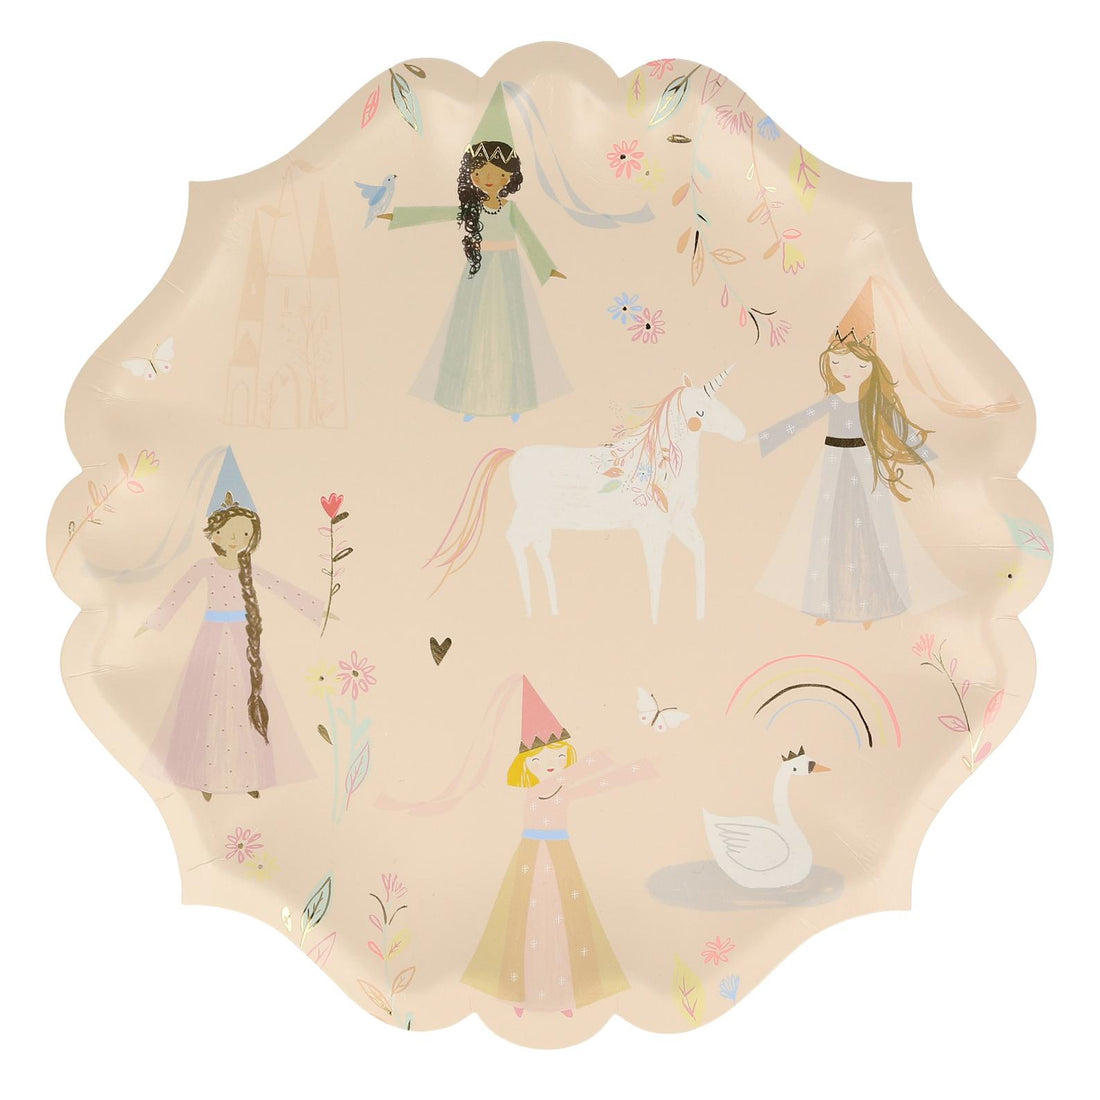 Illustration of fairy tale characters including princesses, a unicorn, and whimsical elements on Meri Meri&